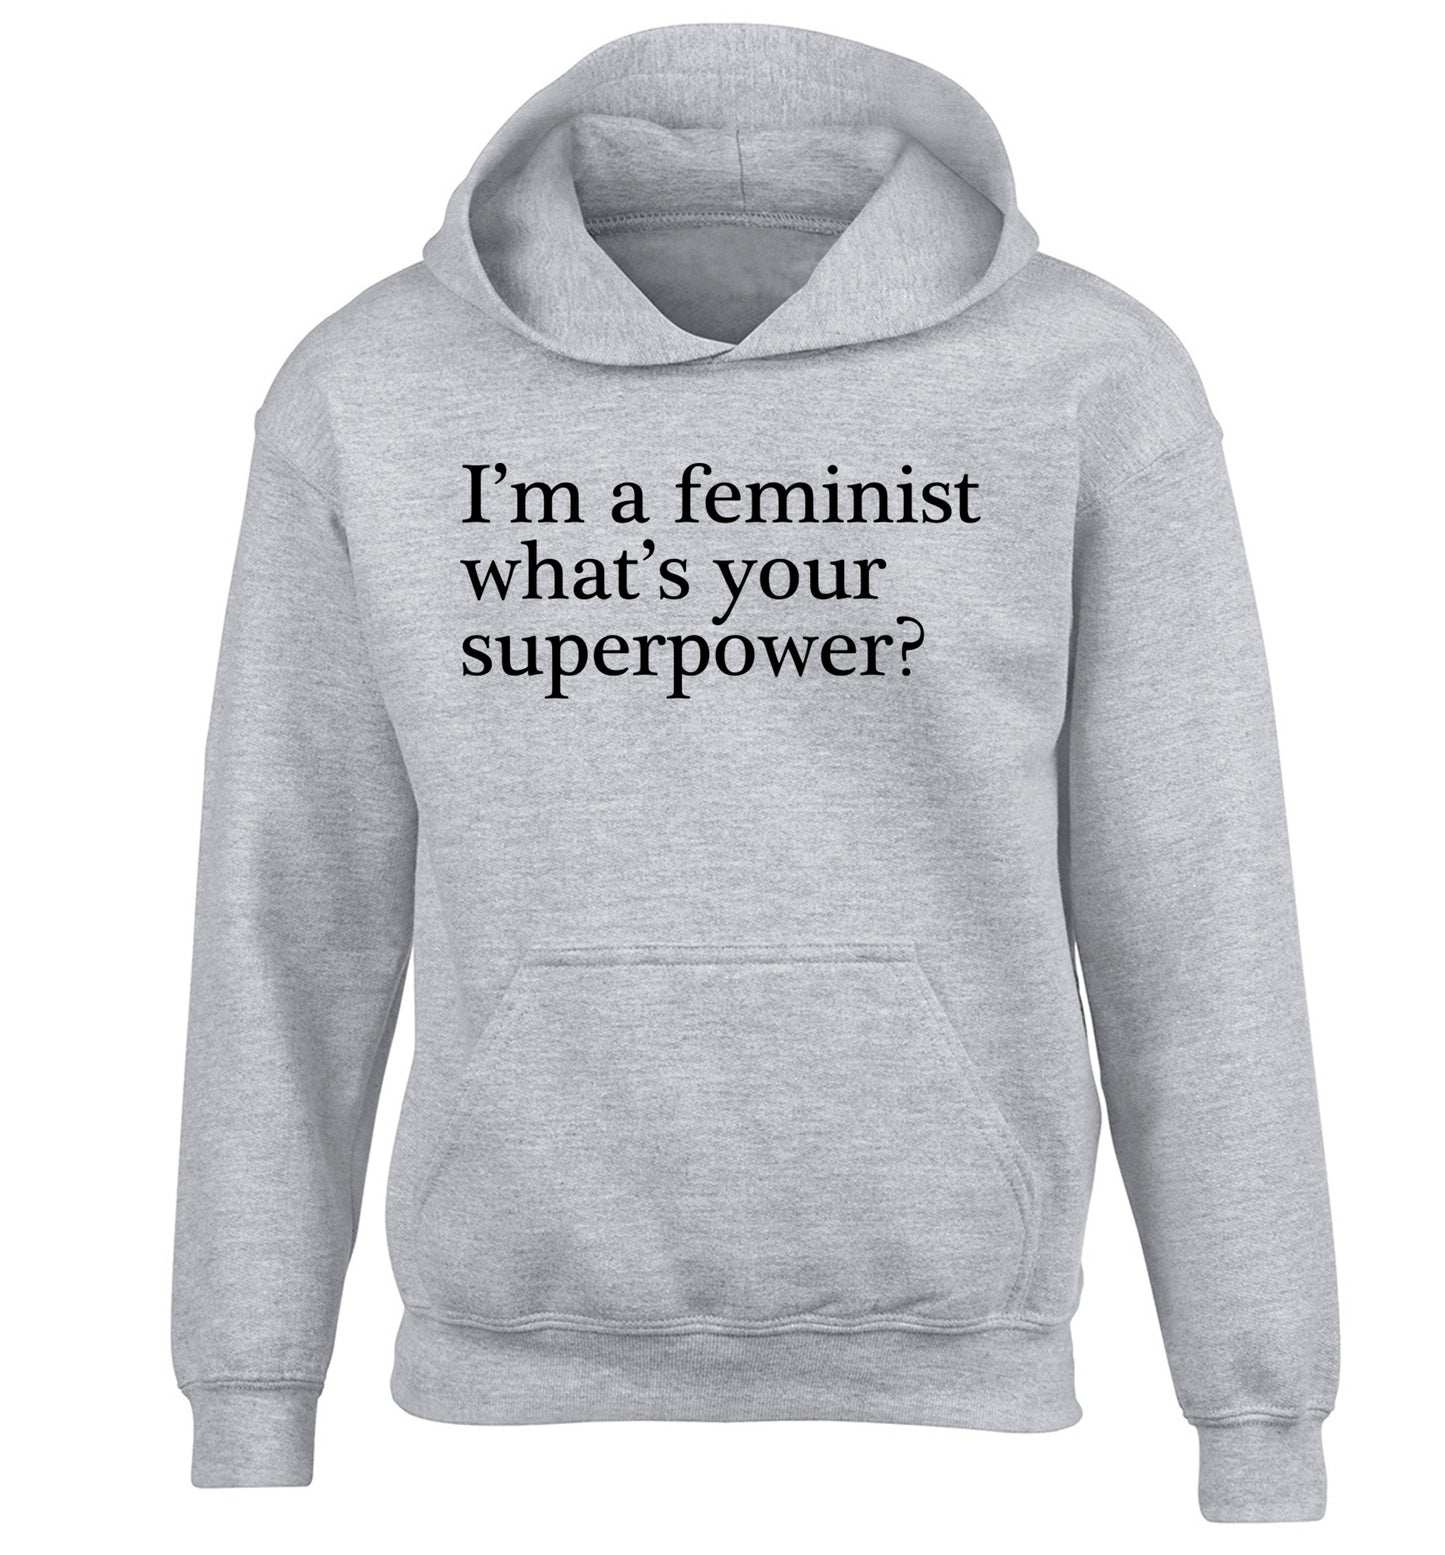 I'm a feminist what's your superpower? children's grey hoodie 12-14 Years